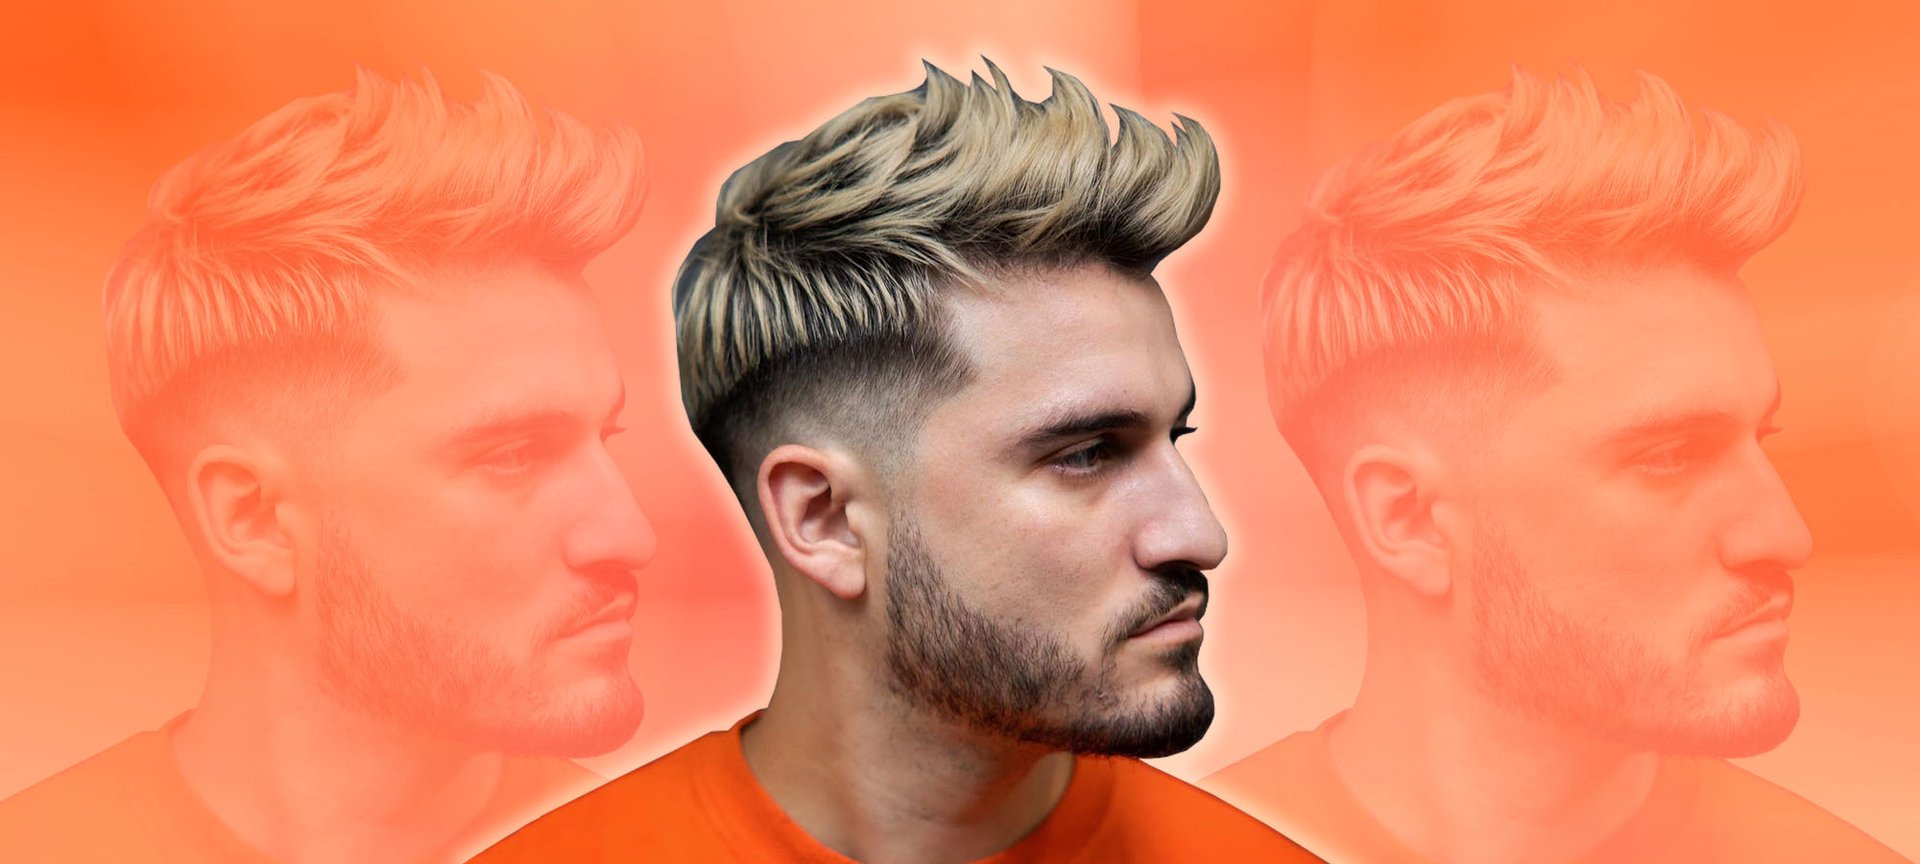 7 Best Mens Hair Cuts & Style Trends For 2023 - GQ Australia